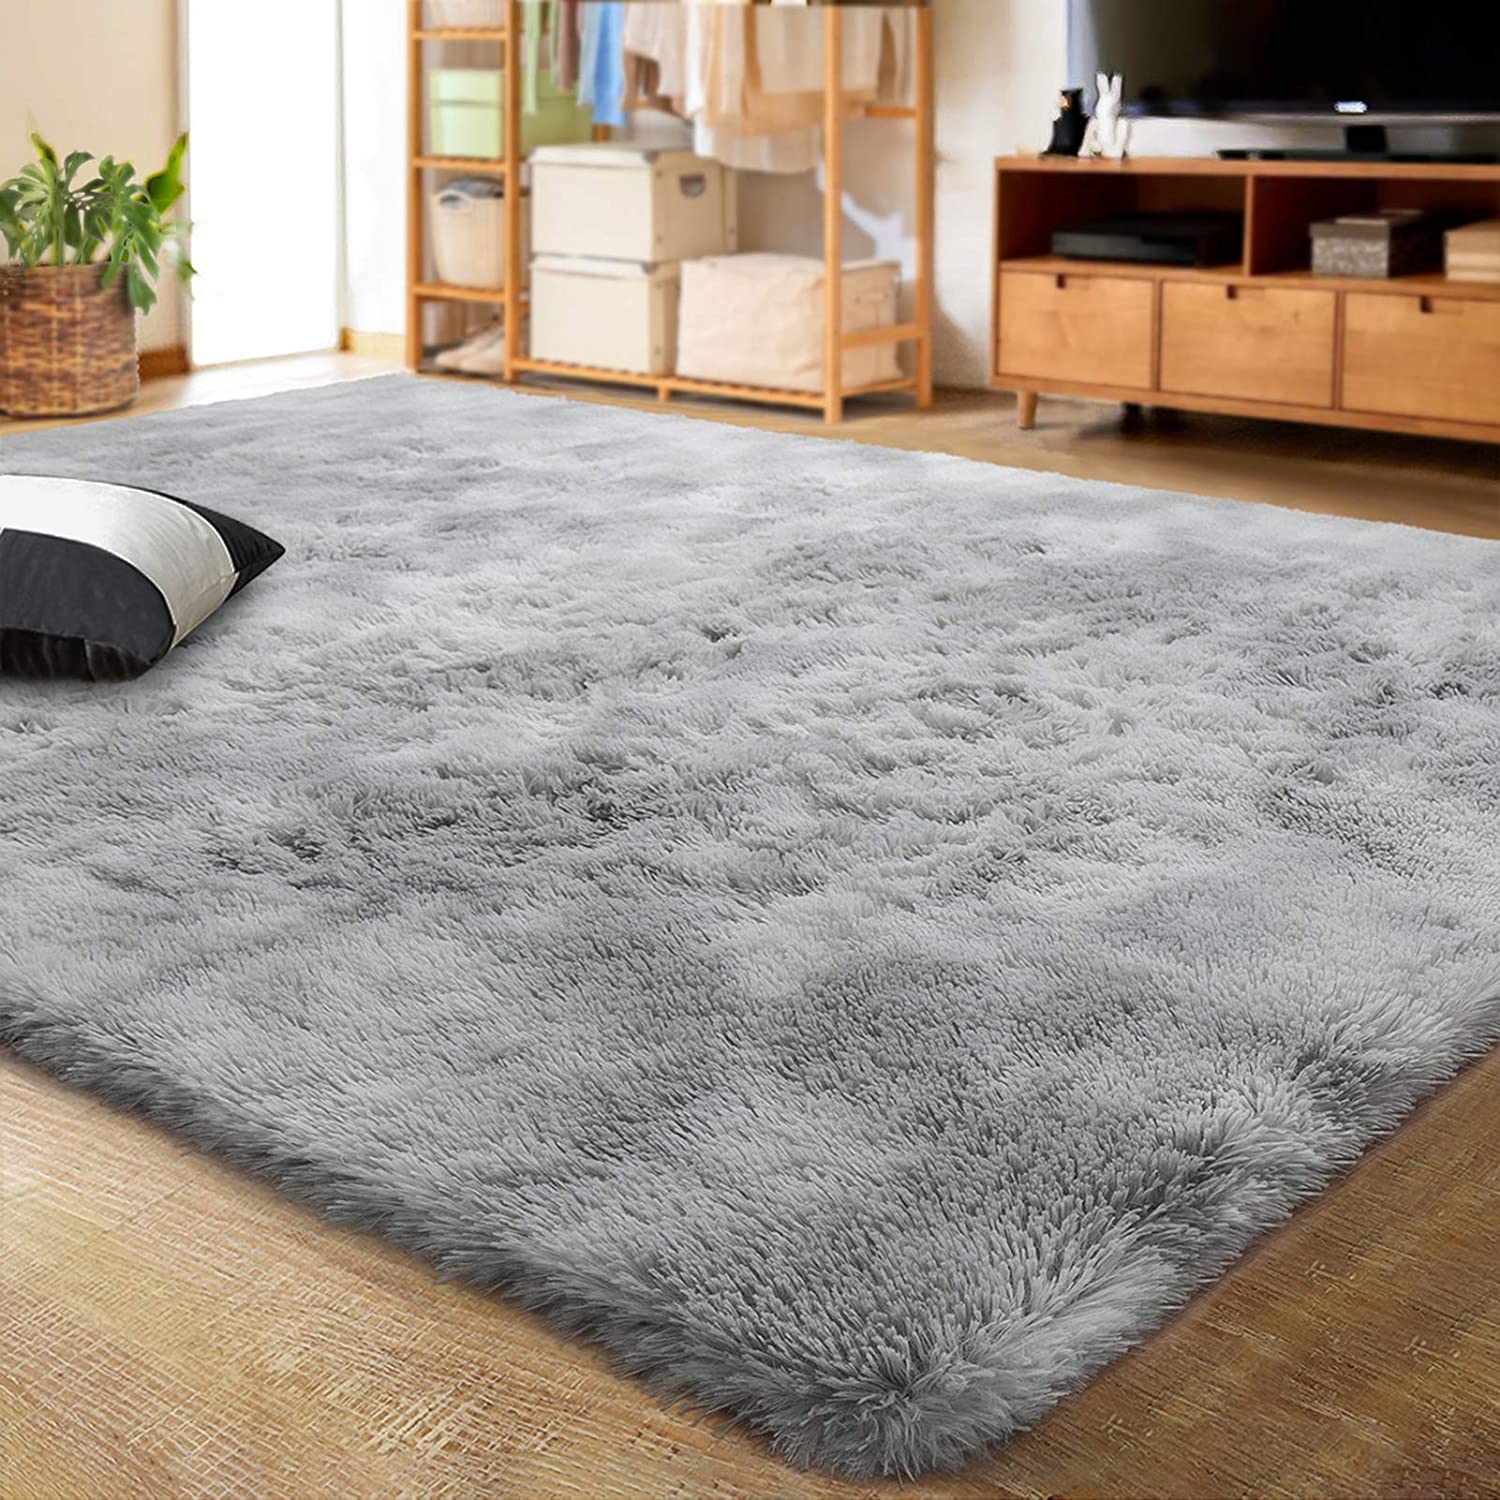 Shag rugs for added comfort and luxury